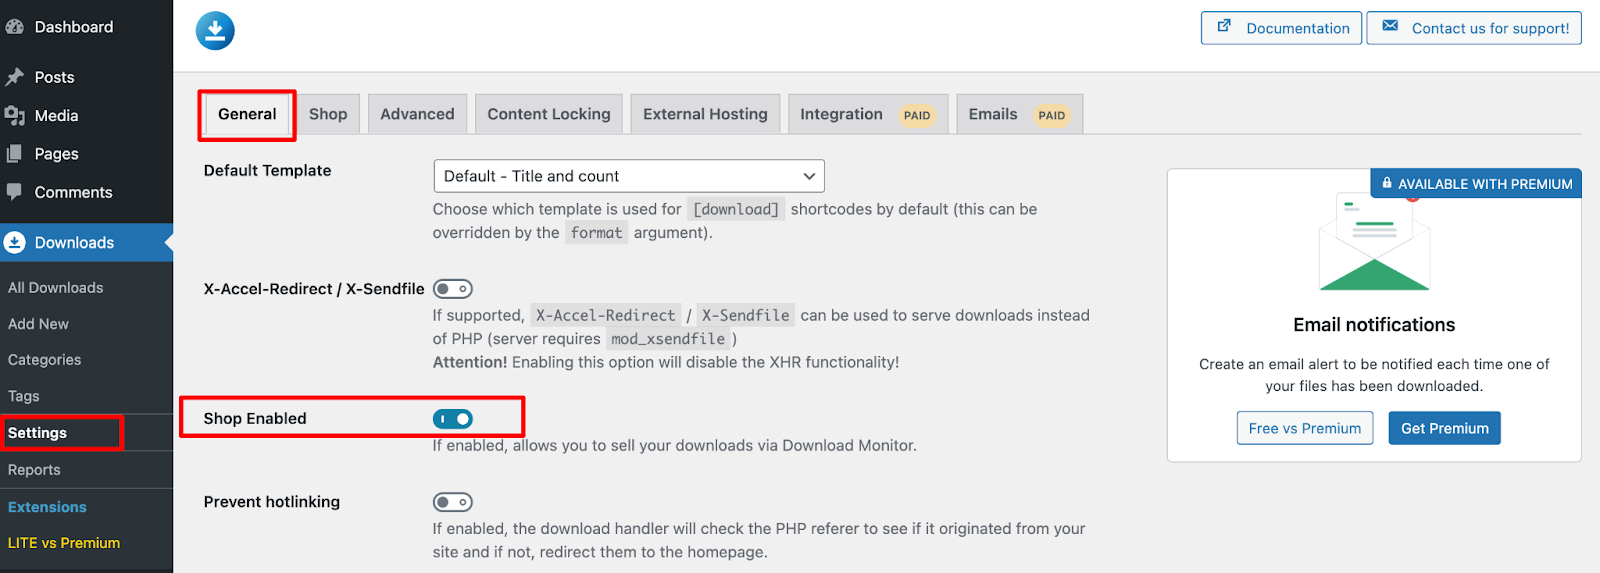 activate 'shop enabled' feature of  Download Monitor plugin